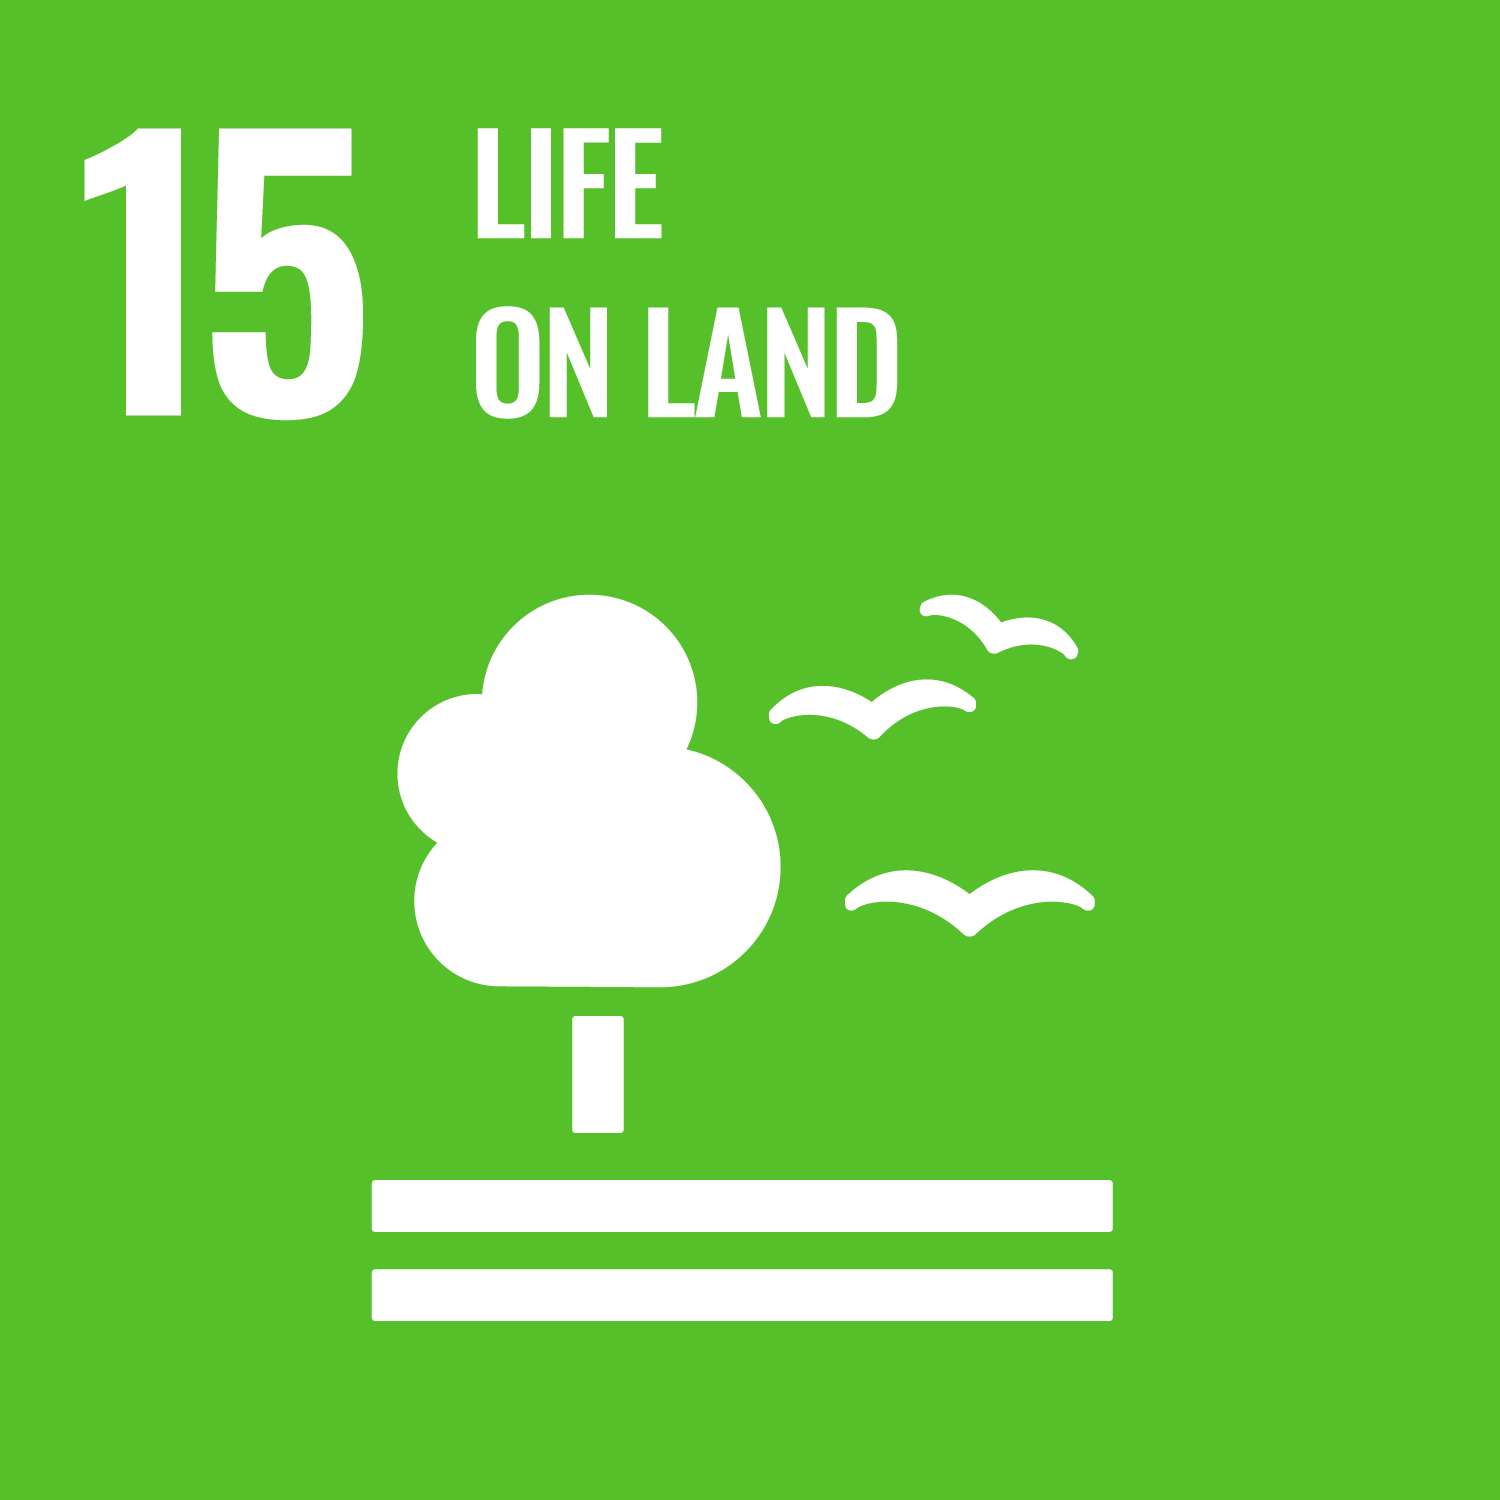 SGD 15 - Protect, restore and promote sustainable use of terrestrial ecosystems, sustainably manage forests, combat desertification, and halt and reverse land degradation and halt biodiversity loss